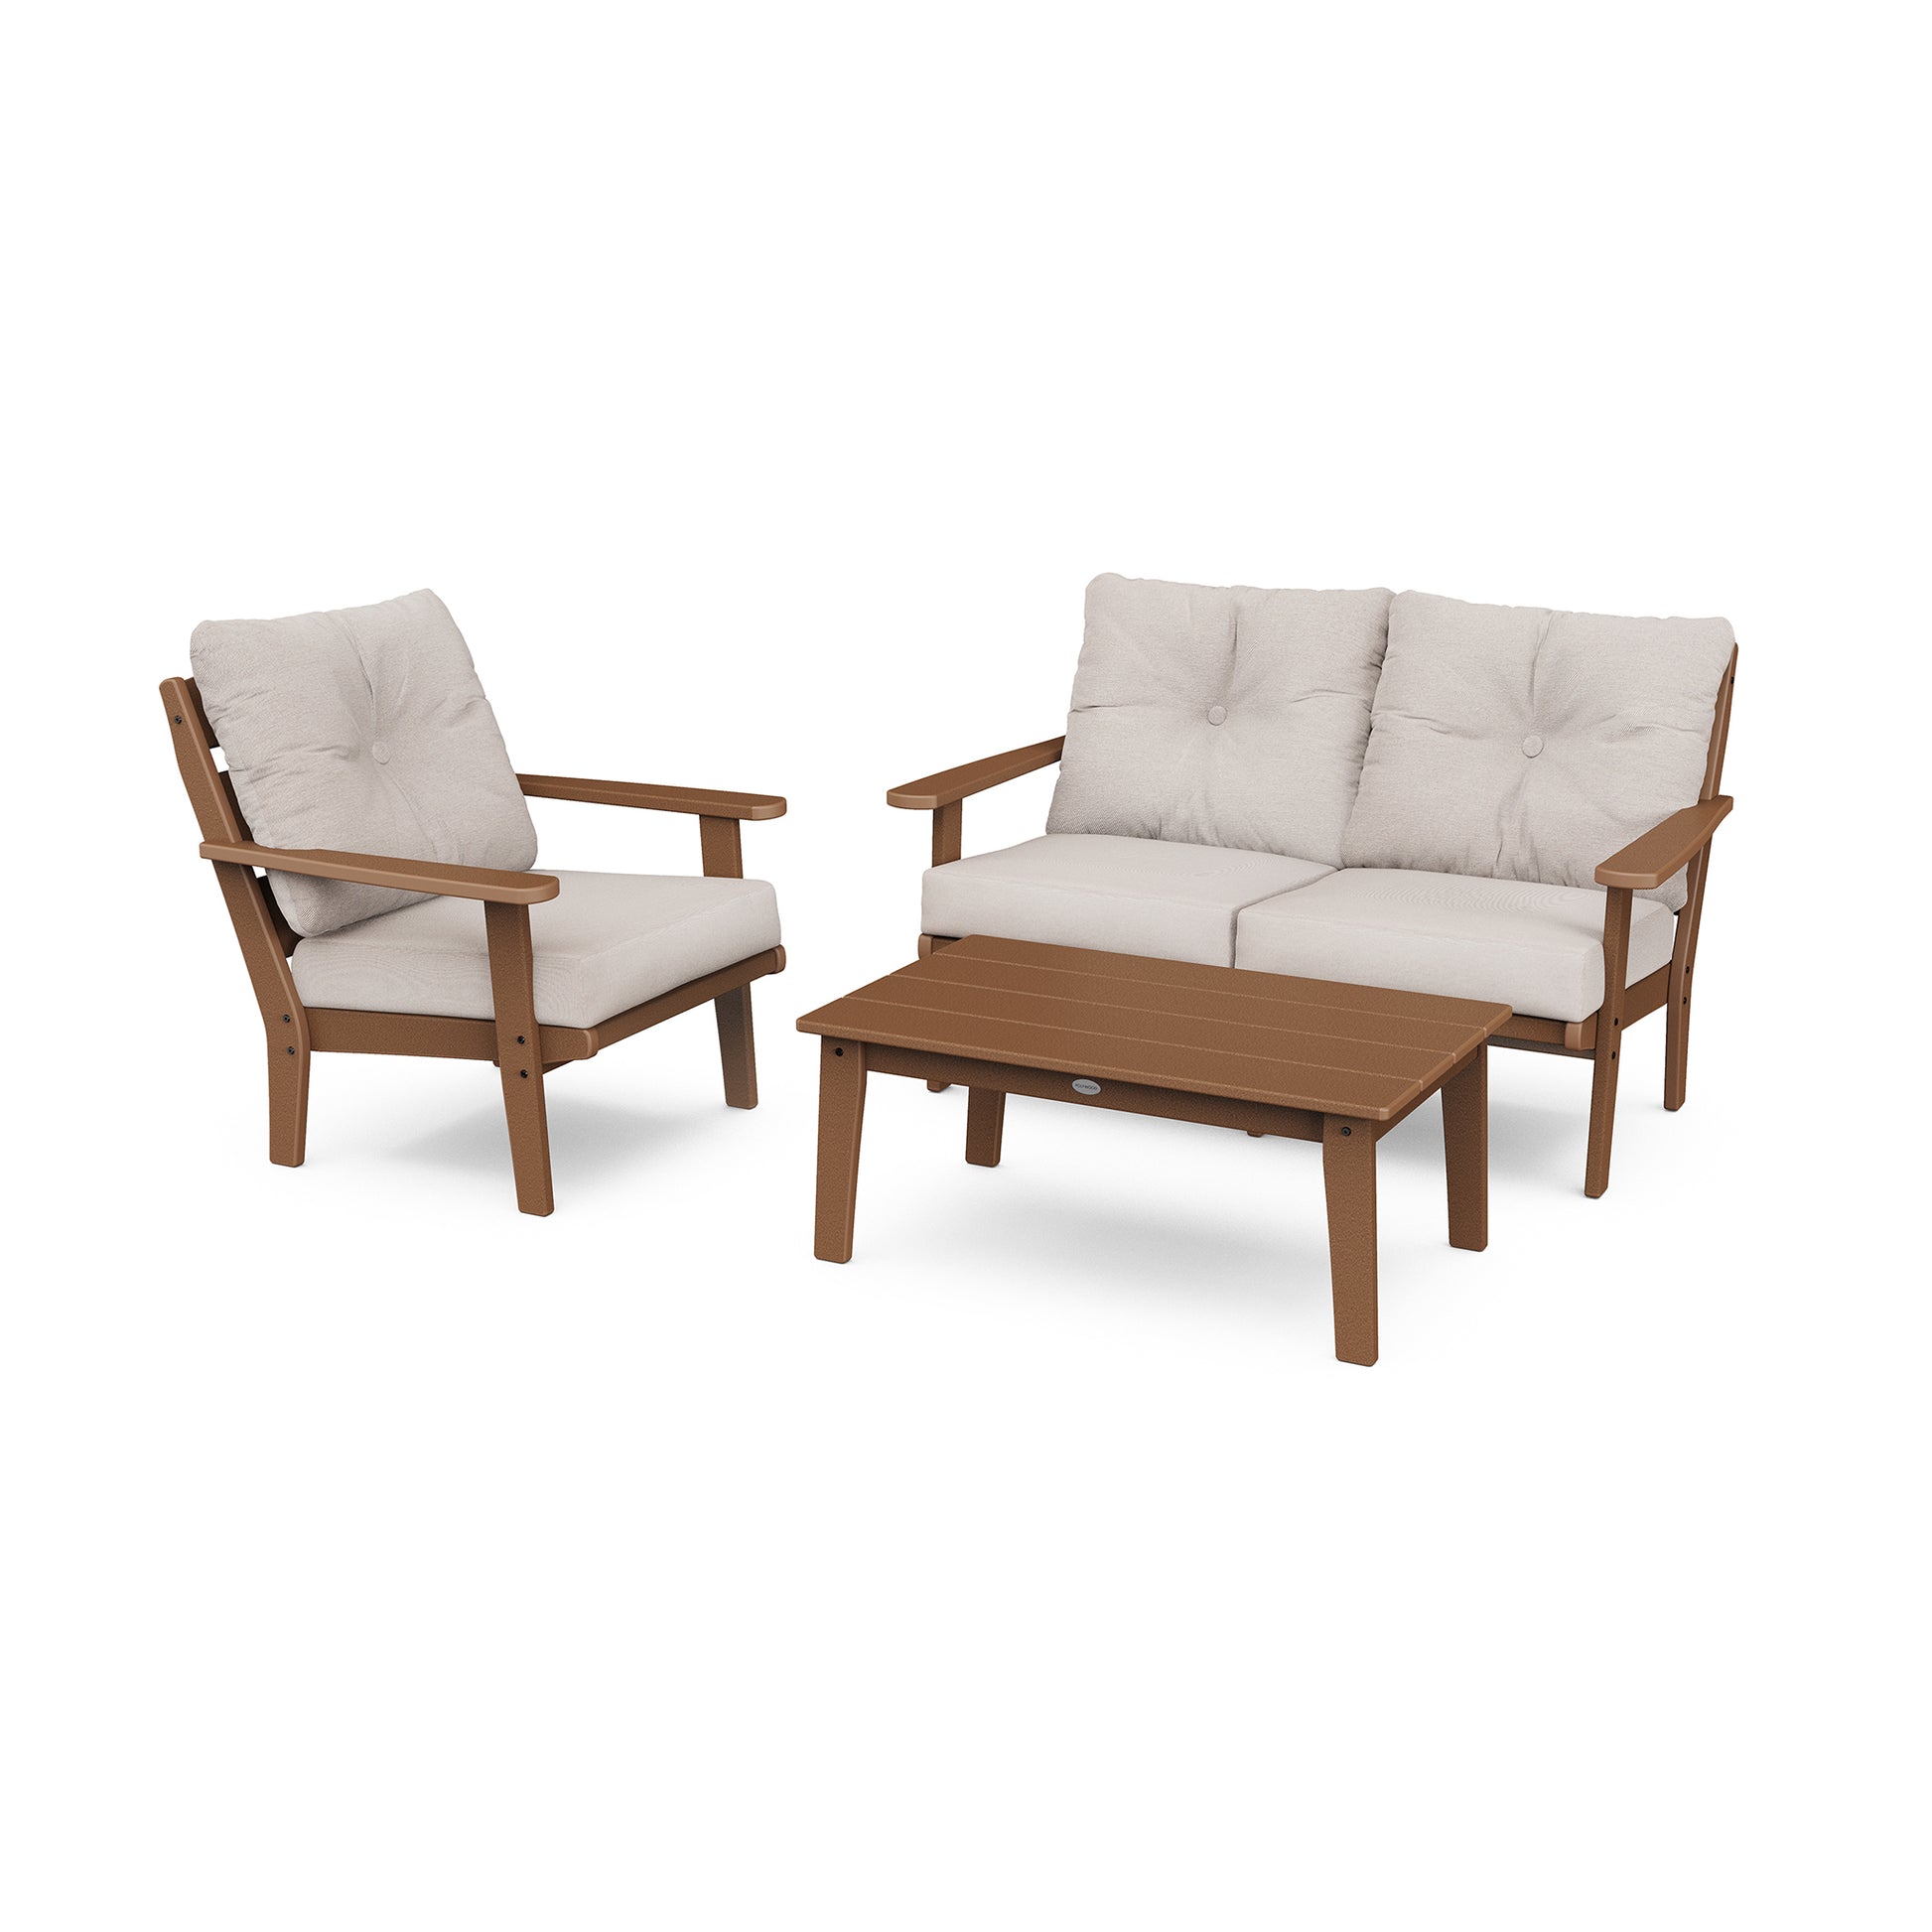 A POLYWOOD Lakeside 3-Piece Deep Seating Set featuring two wooden armchairs with beige cushions and a matching wooden coffee table, all on a white background.